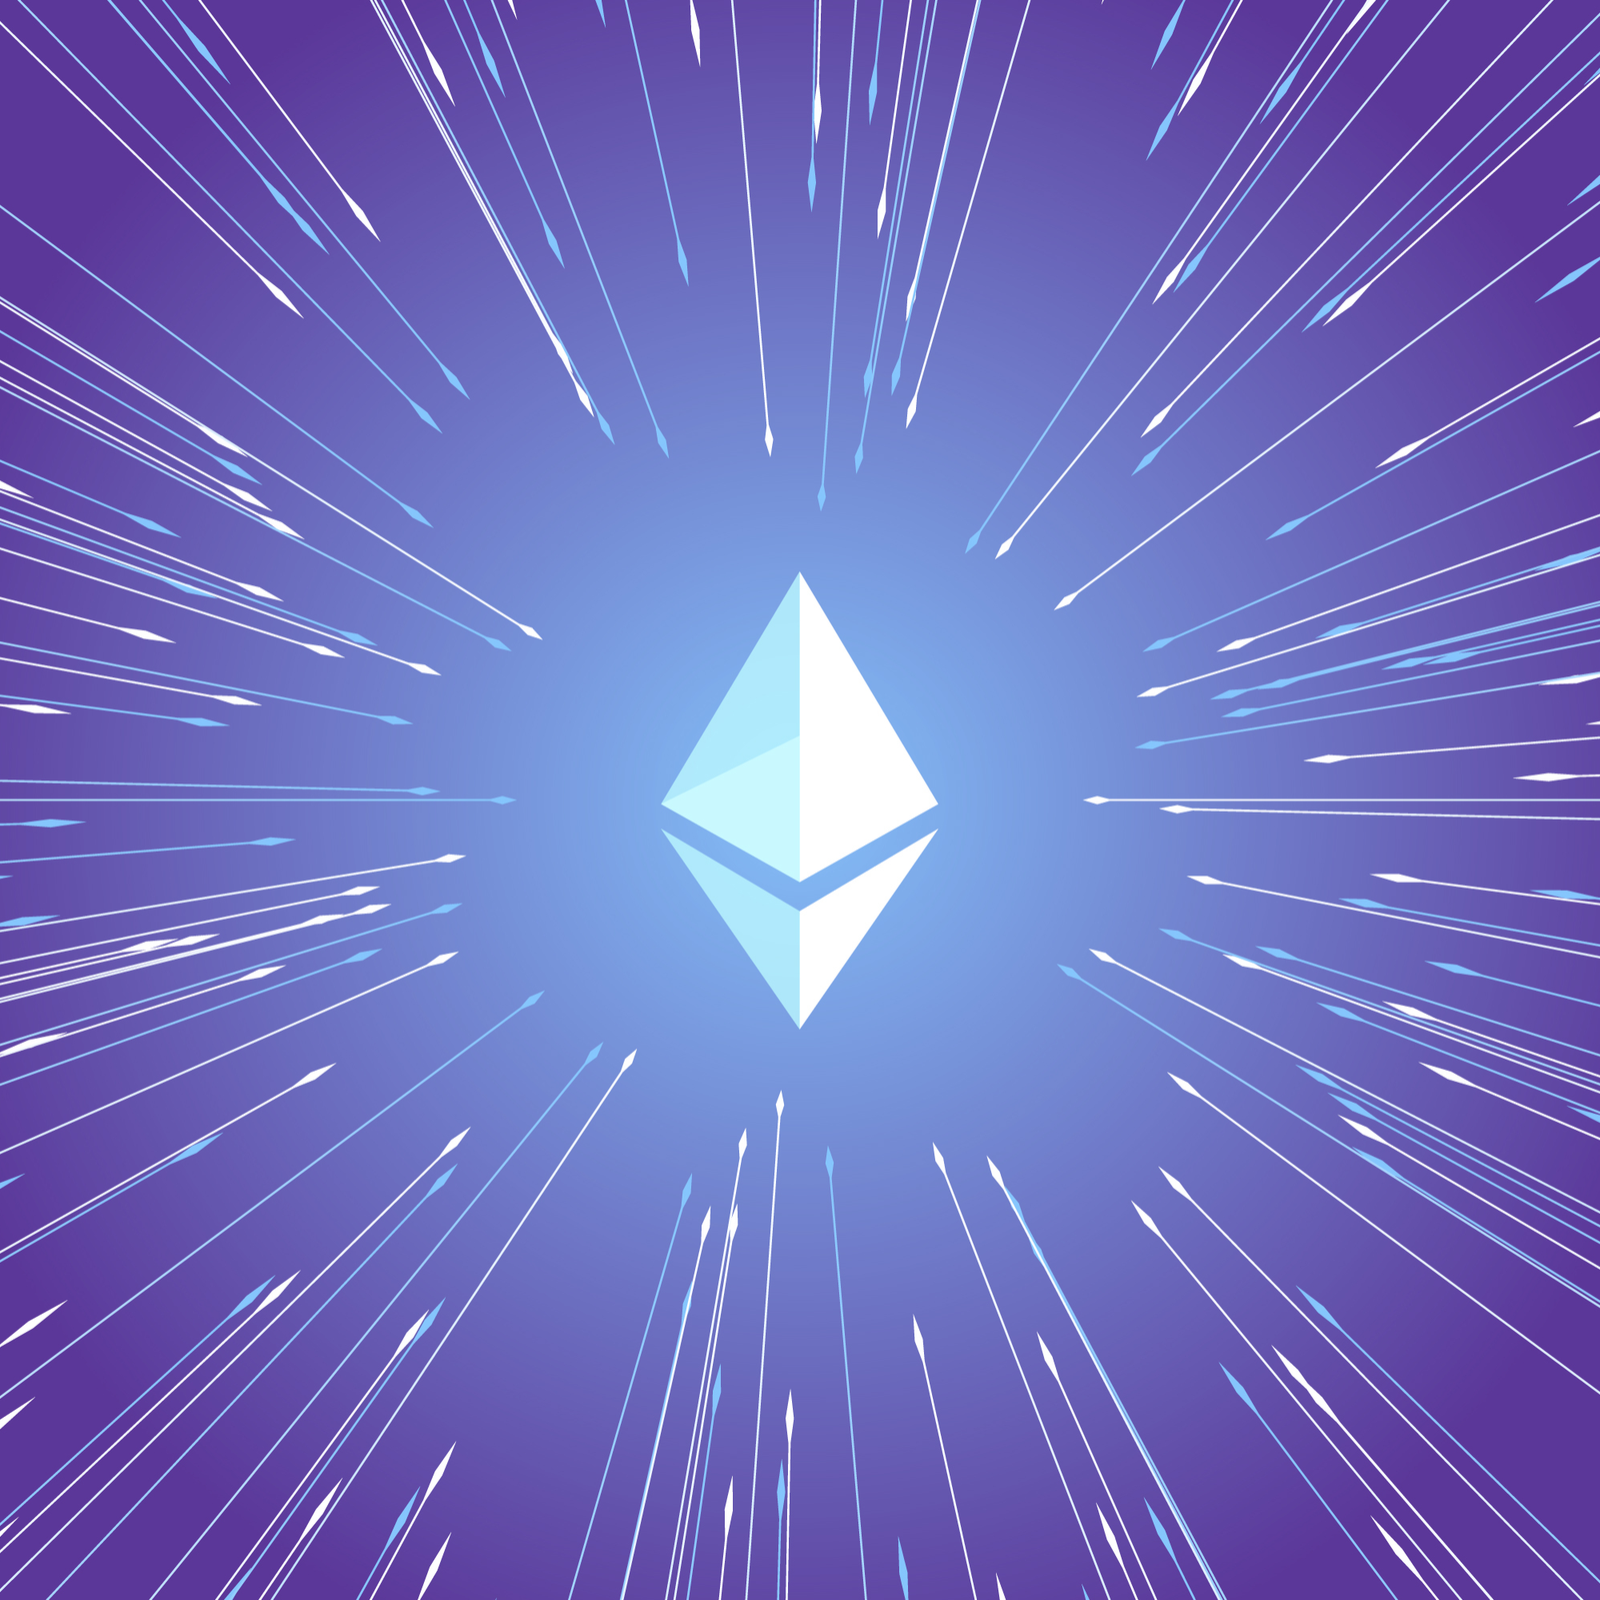 ICOs Have Profited Off Selling Ethereum